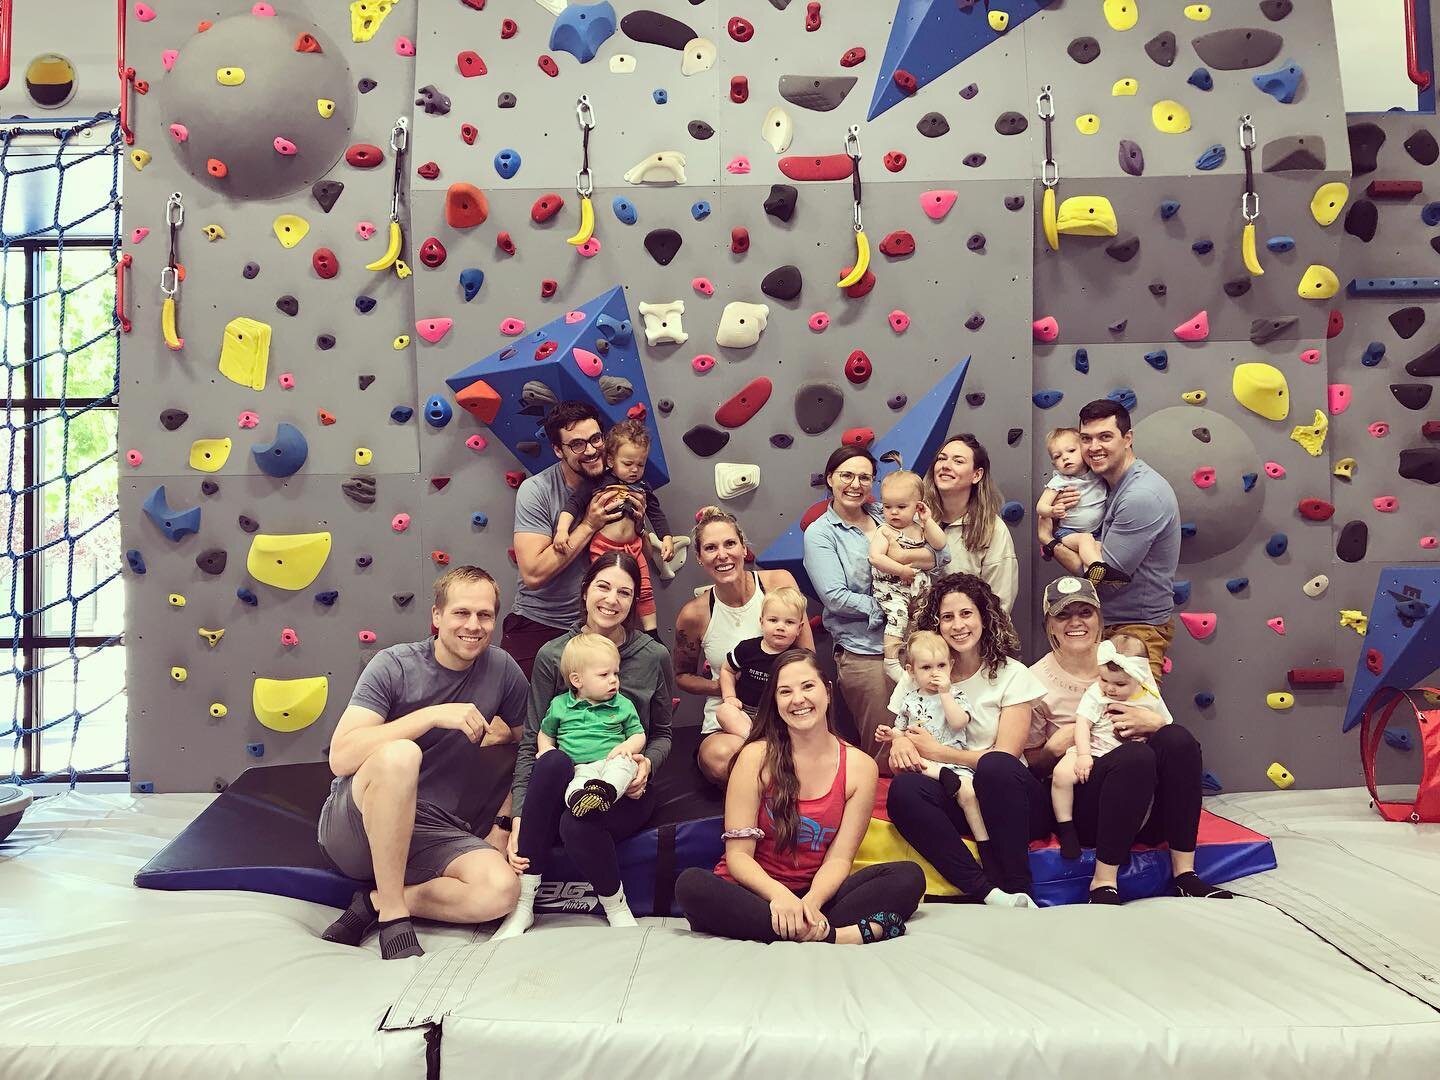 Baby &amp; Mini graduates on our last day of ninja school before summer ☀️
I&rsquo;ll miss the littles &amp; the mamas + papas!!! 💜 
What a wonderful group of souls&hellip;. Can&rsquo;t wait to run into ya&rsquo;ll at allll the playgrounds and brewe